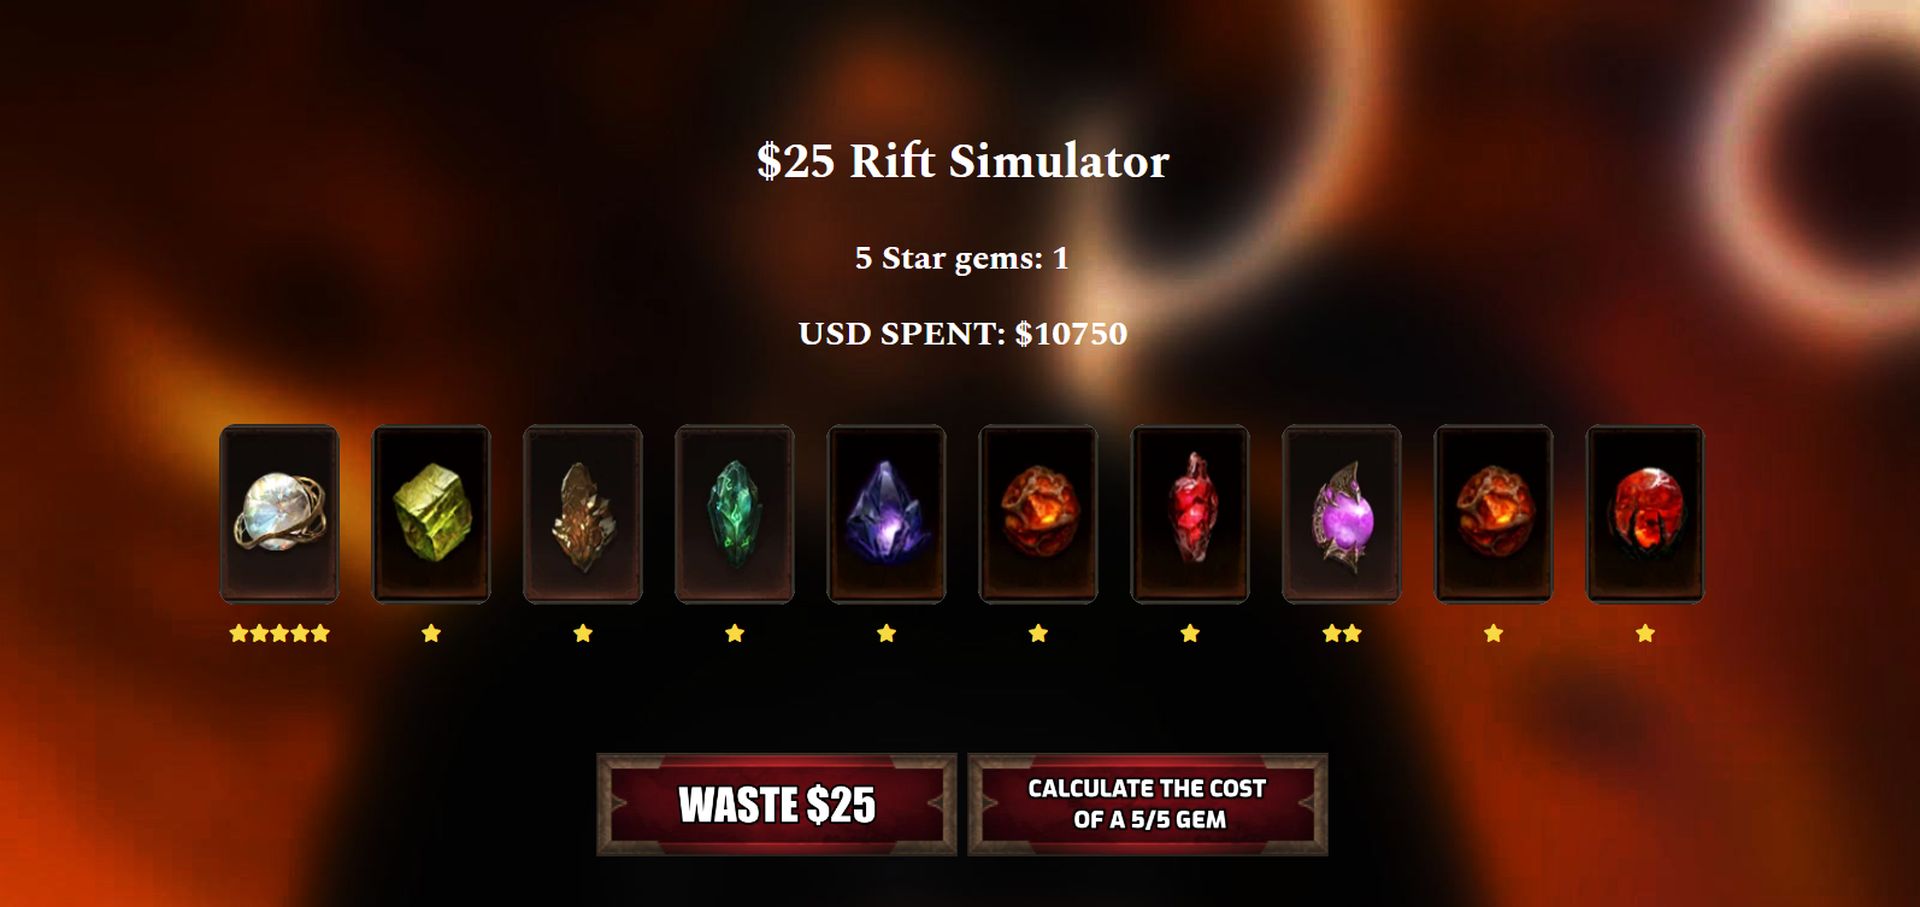 In this article, we are going to go over Rift Simulator Diablo Immortal, which simulates the cost of a random 5/5 gem based on the drop chances in-game.